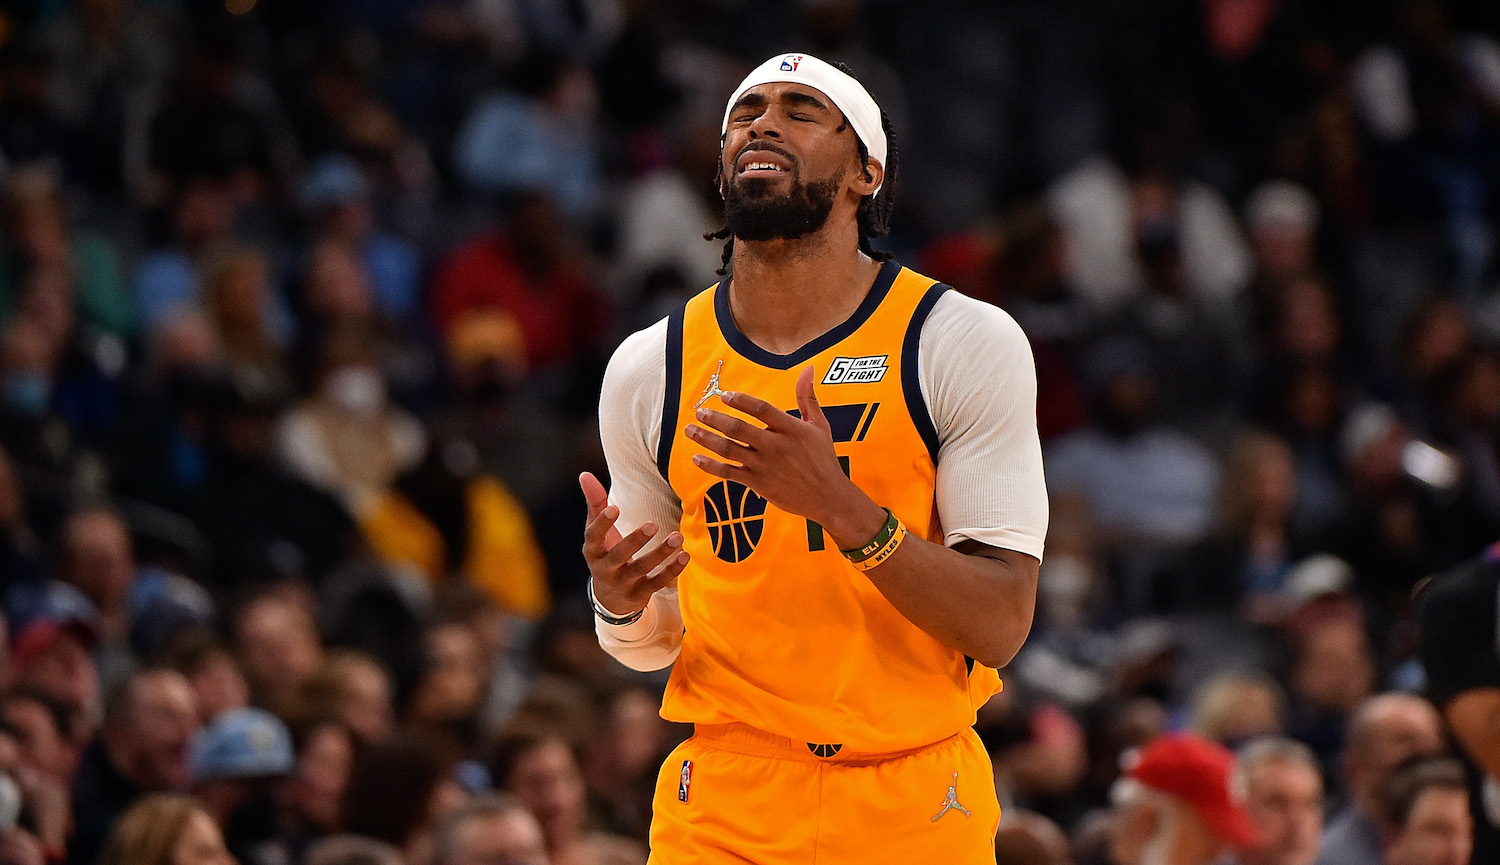 MEMPHIS, TENNESSEE - JANUARY 28: Mike Conley #11 of the Utah Jazz reacts during the second half against the Memphis Grizzlies at FedExForum on January 28, 2022 in Memphis, Tennessee. NOTE TO USER: User expressly acknowledges and agrees that, by downloading and or using this photograph, User is consenting to the terms and conditions of the Getty Images License Agreement. (Photo by Justin Ford/Getty Images)